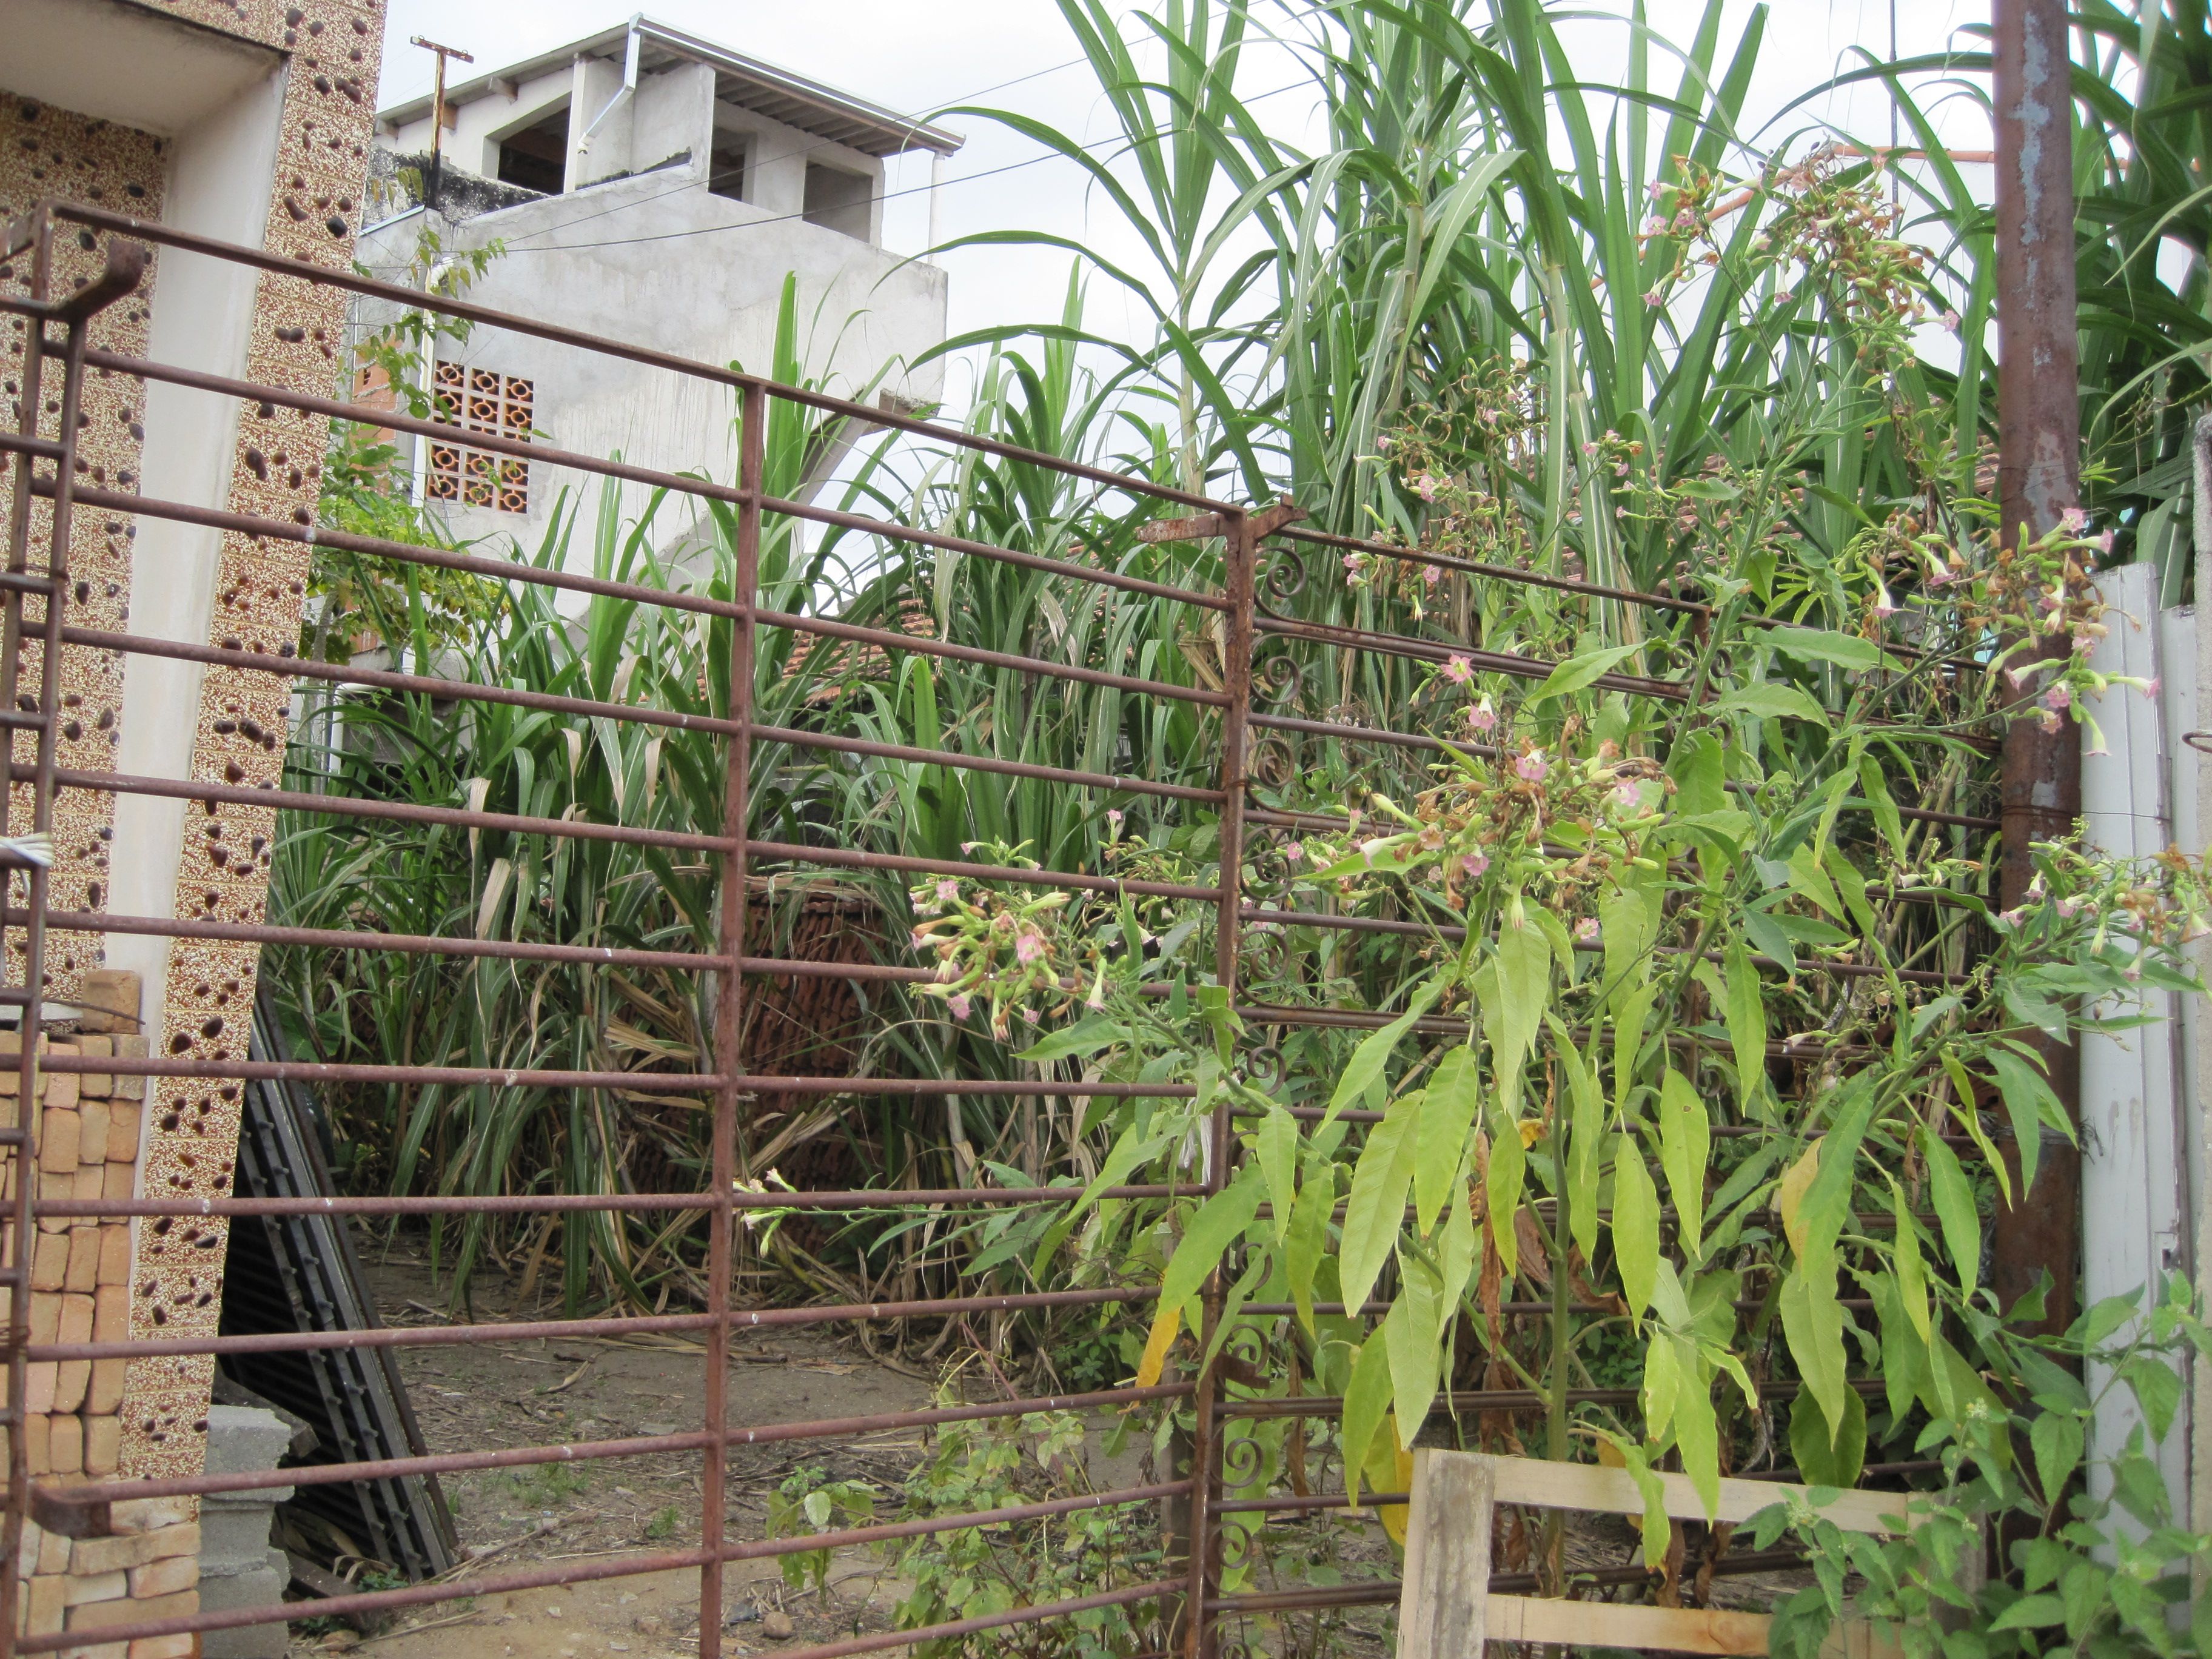 Sugarcane towering over a metal gate to a yard.